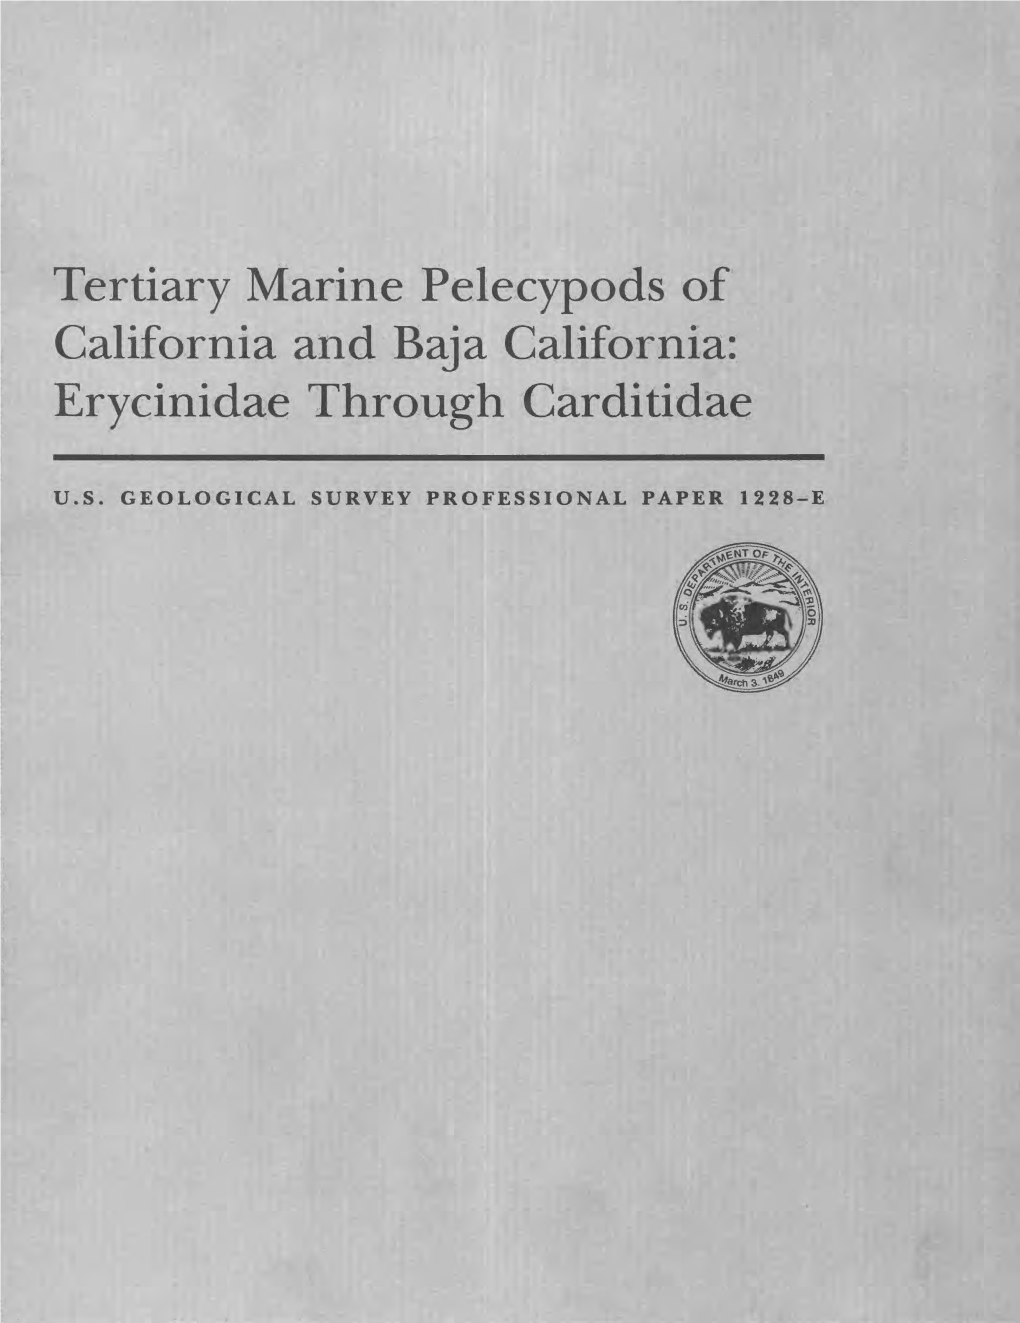 U.S. Geological Survey Professional Paper 1228-E Availability of Books and Maps of the U.S